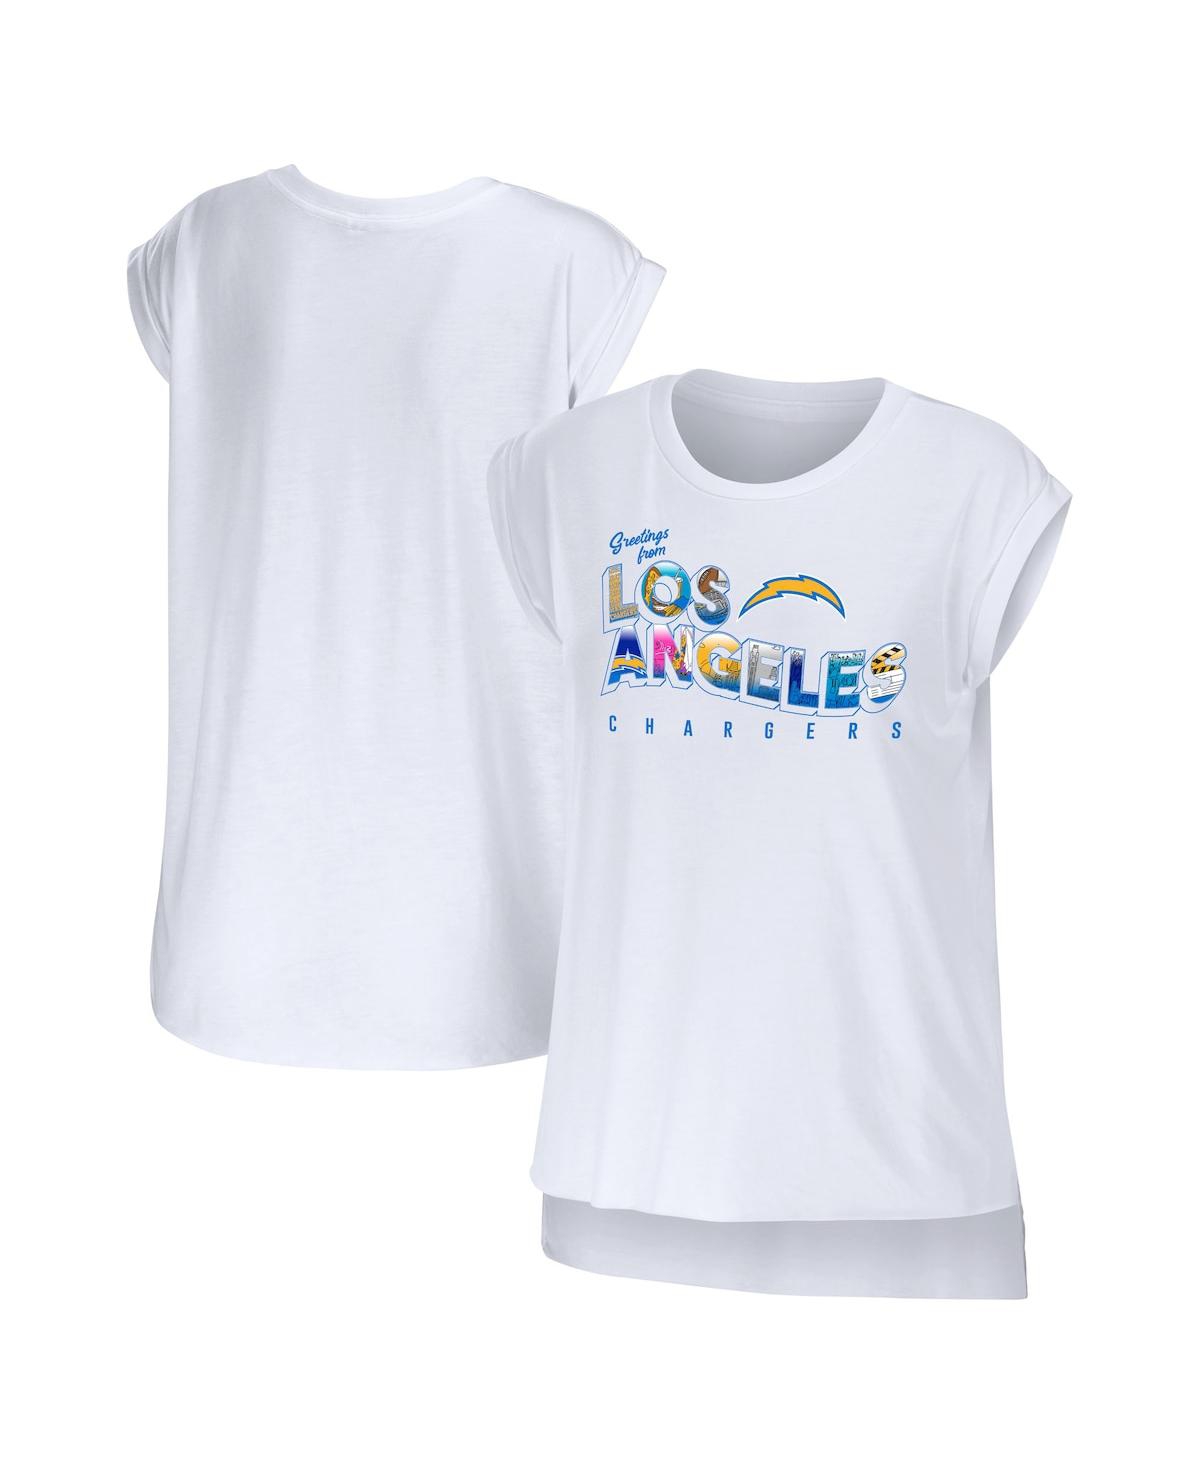 Shop Wear By Erin Andrews Women's  White Los Angeles Chargers Greetings From Muscle T-shirt